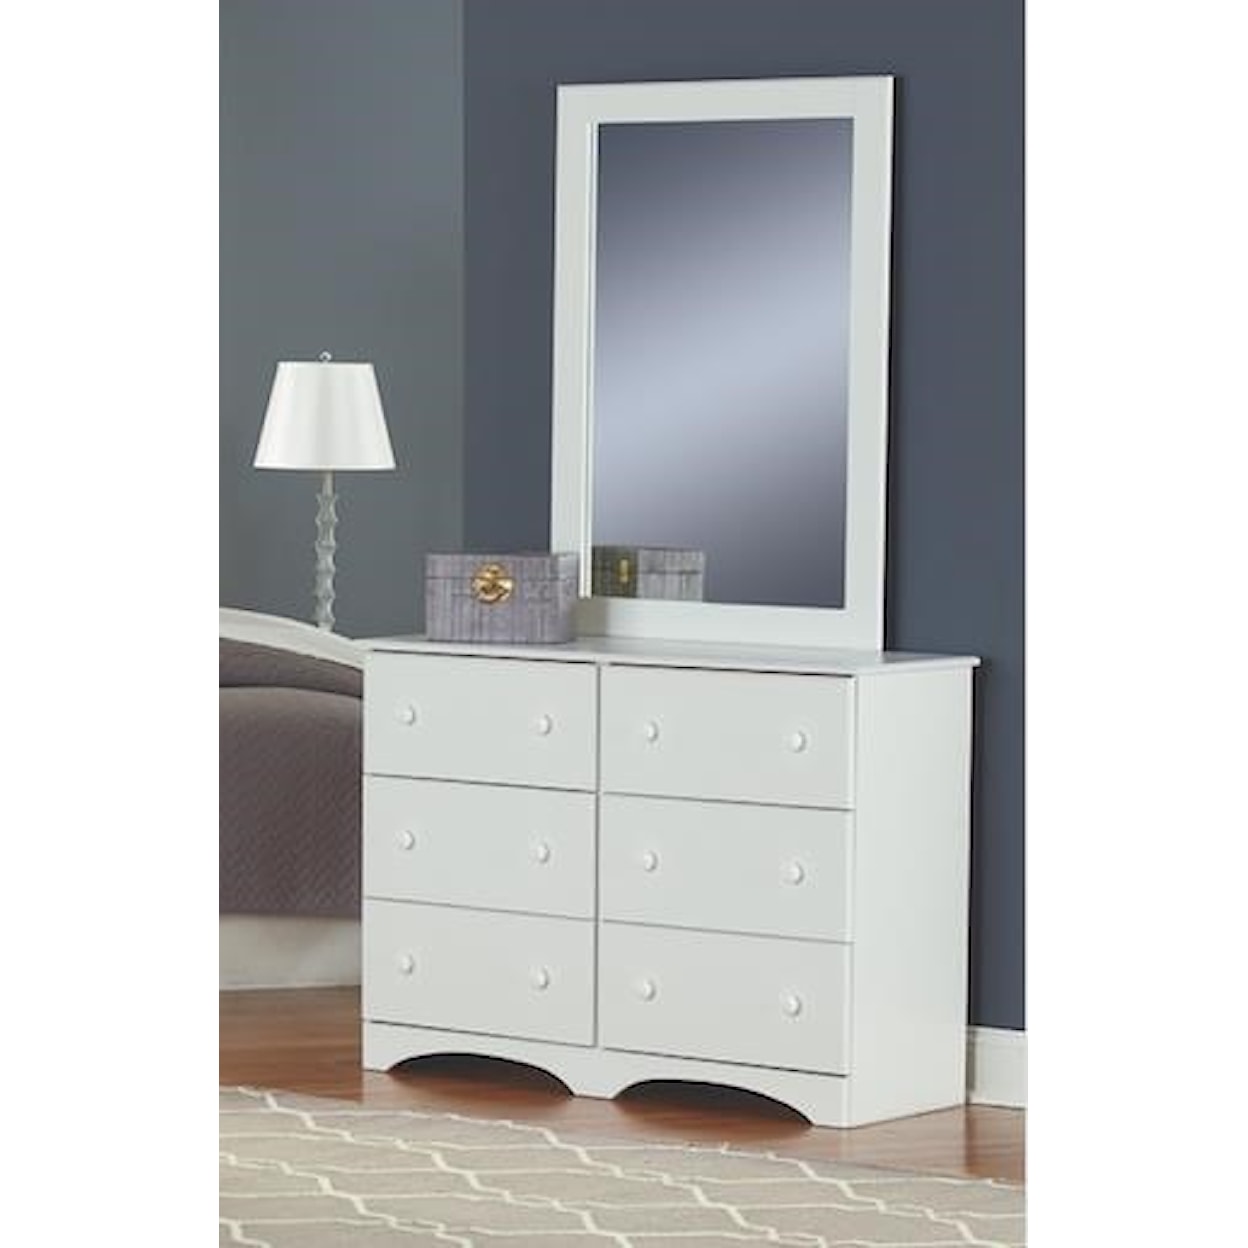 Perdue 14000 Series 4 Piece Full Bookcase Headboard Group